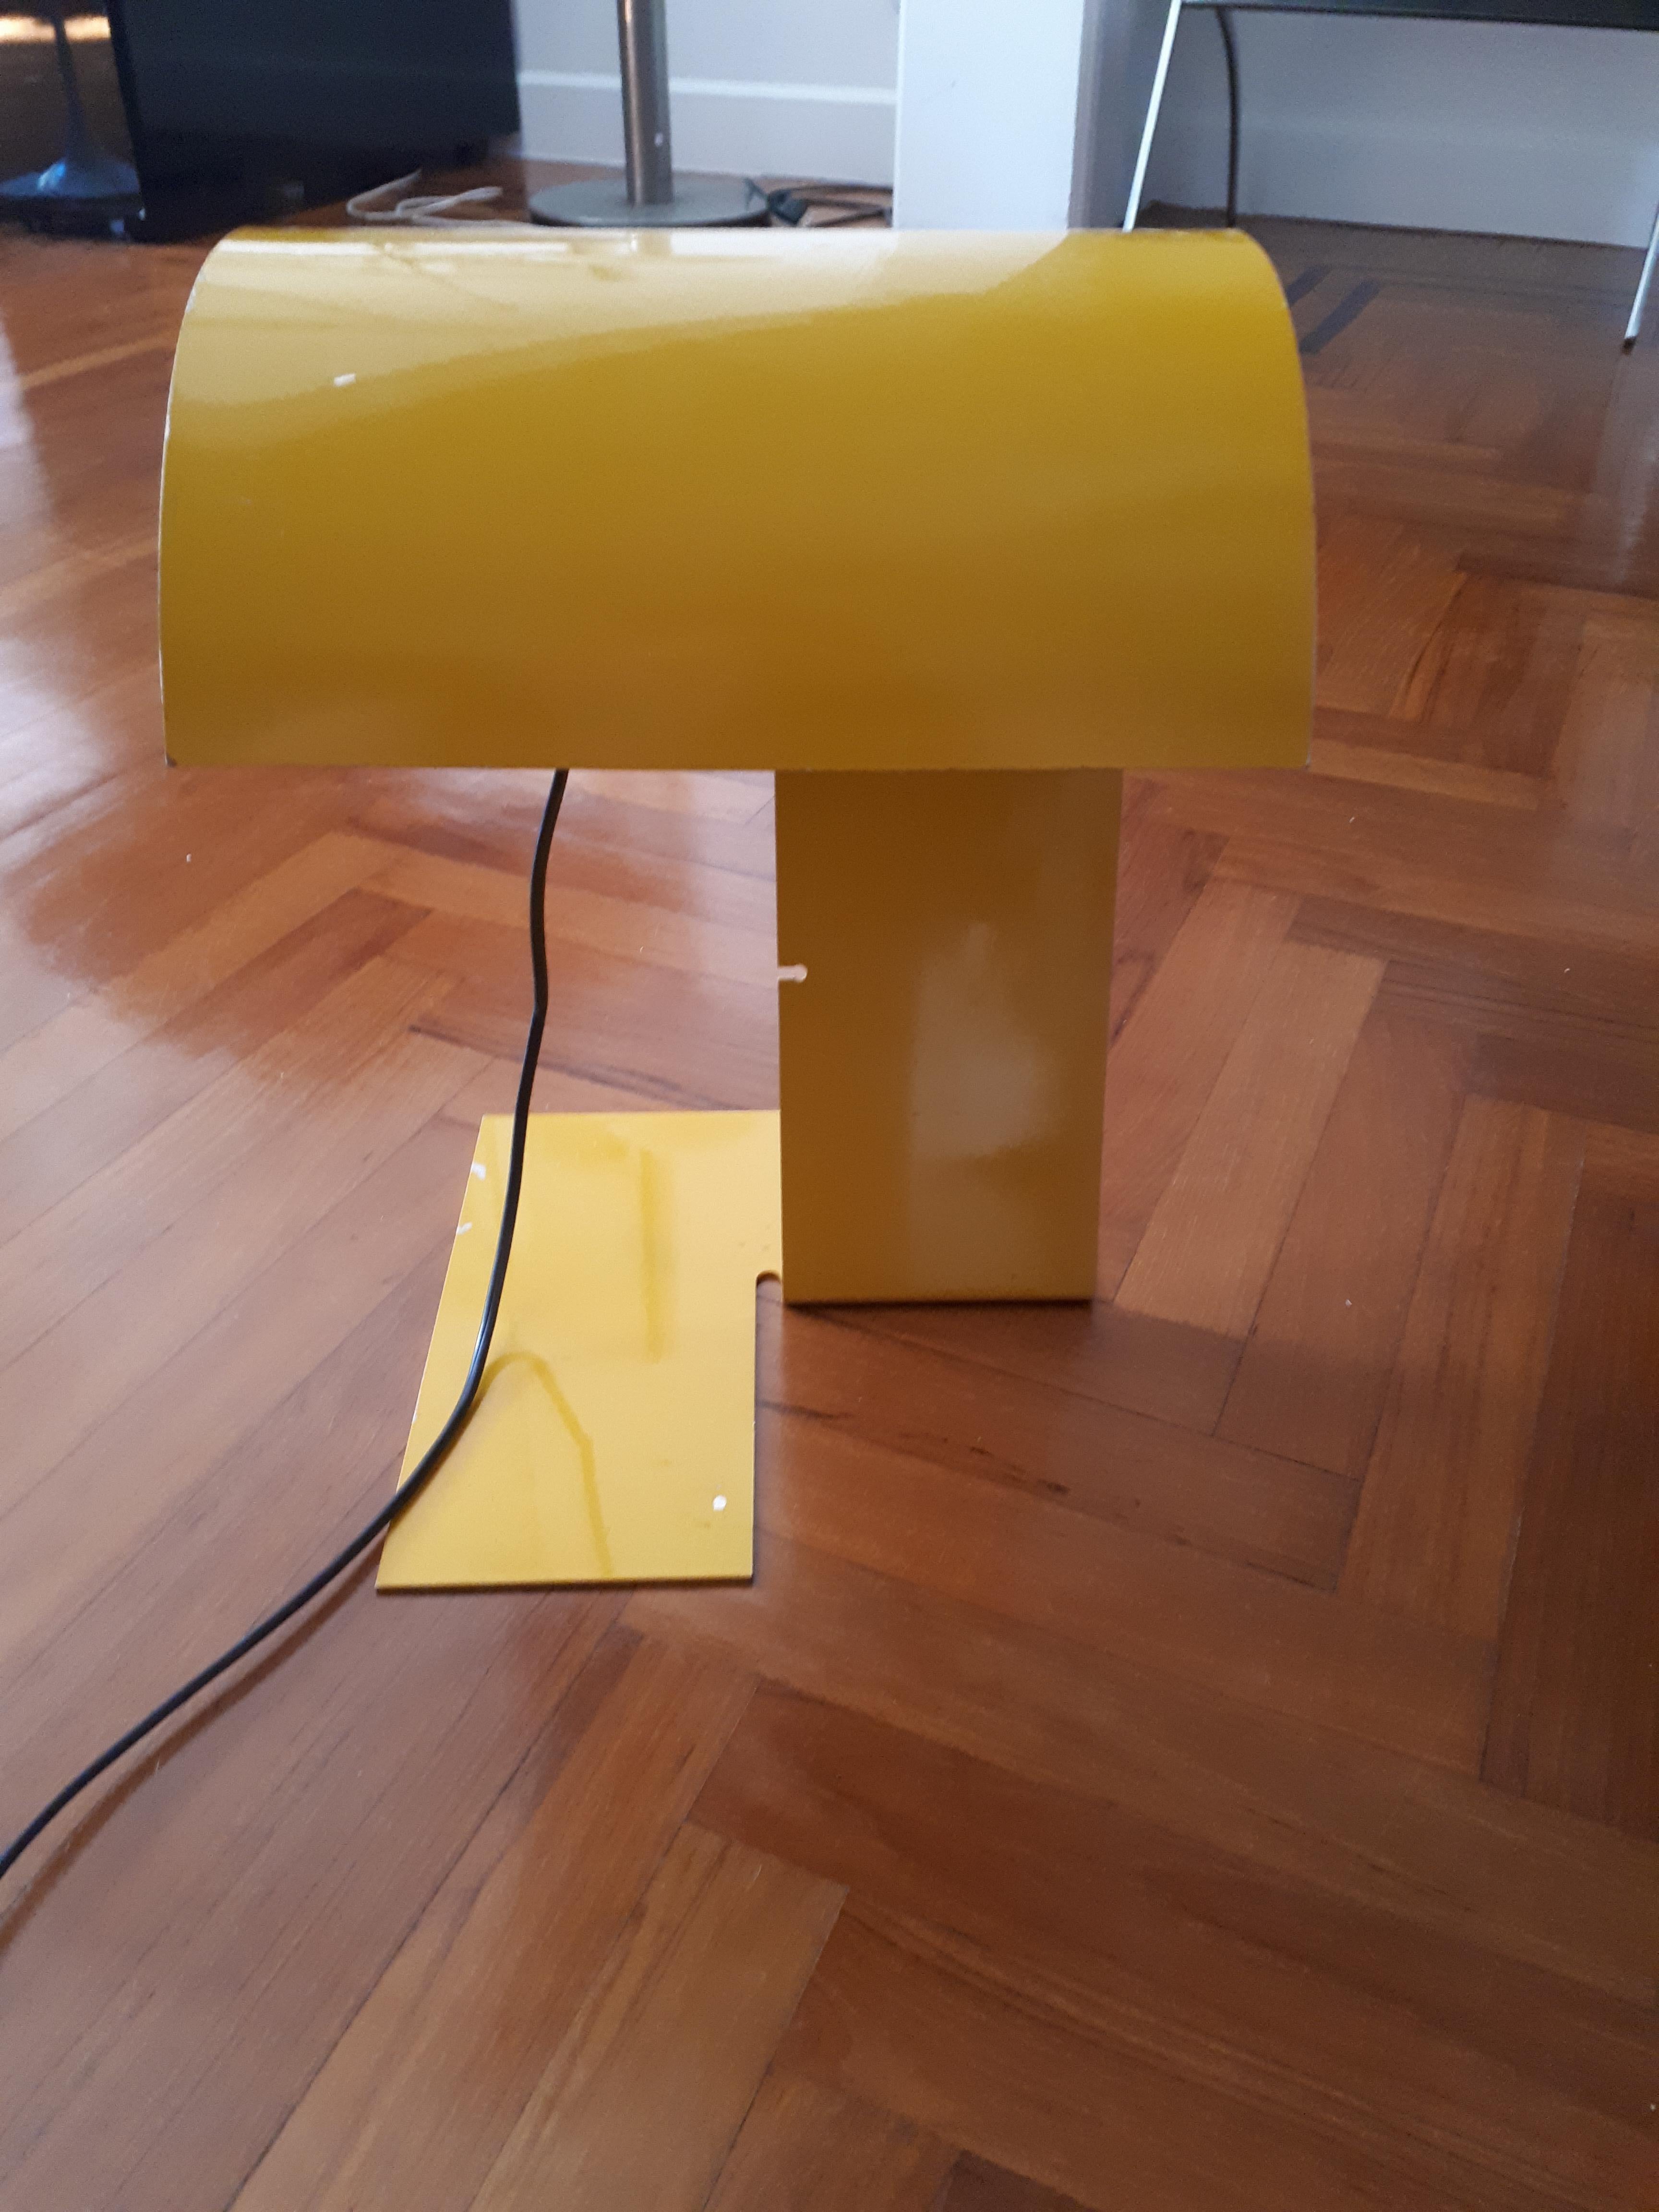 Table lamp model Blitz designed by Trabucco, Vecchi and Volpi for Stilnovo (1973). 
This lamp was made by shaped metal sheet and lacquered in yellow color.
Brand Stilnovo engraved on the base.
     